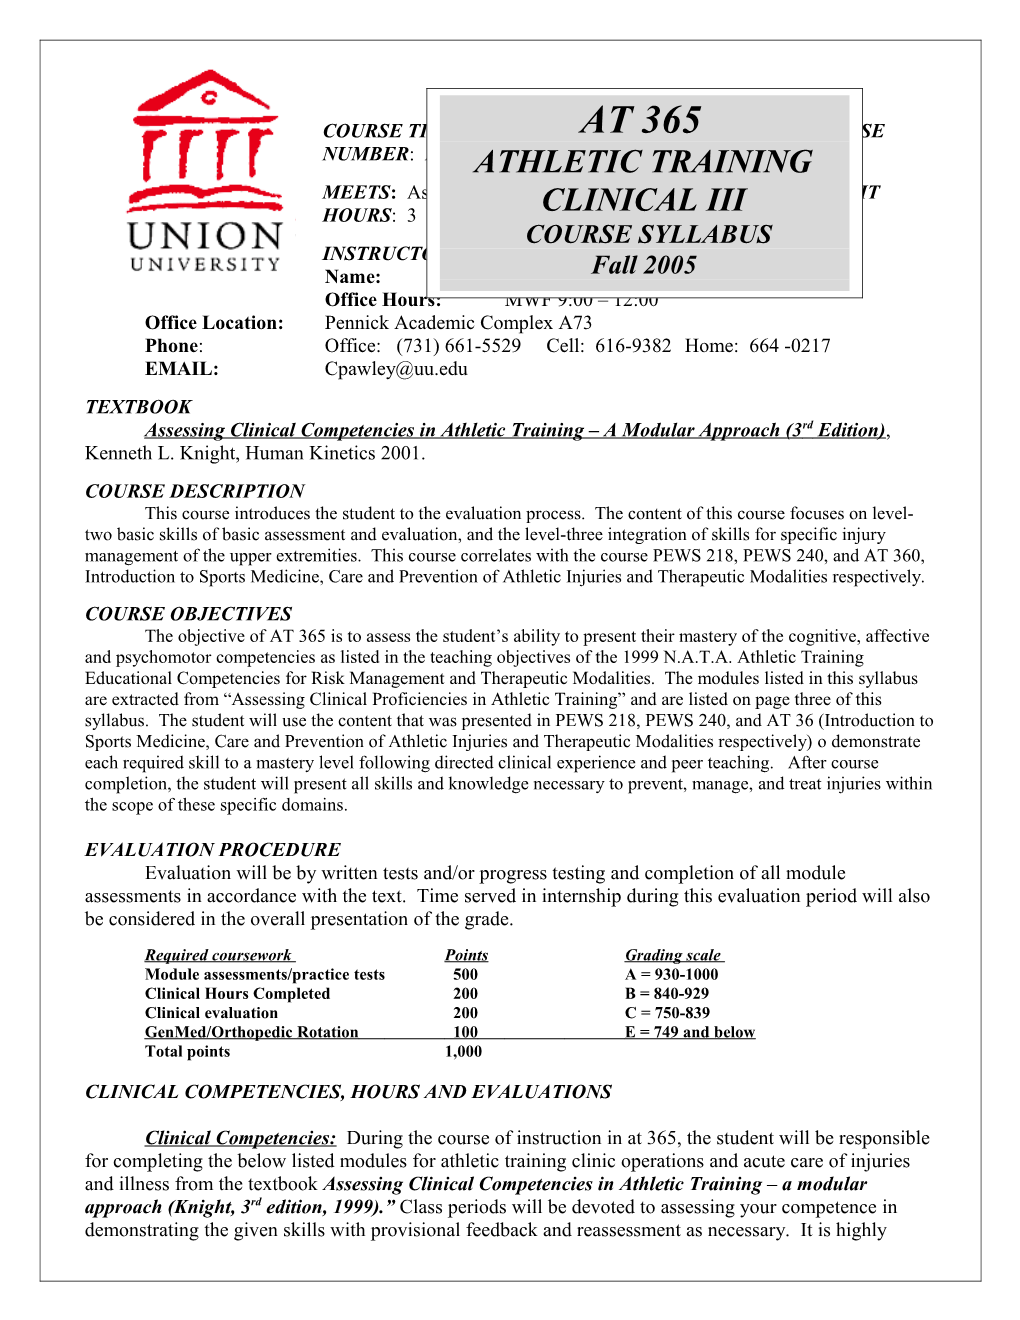 COURSE TITLE: Athletic Training Clinical IIICOURSE NUMBER: at 365